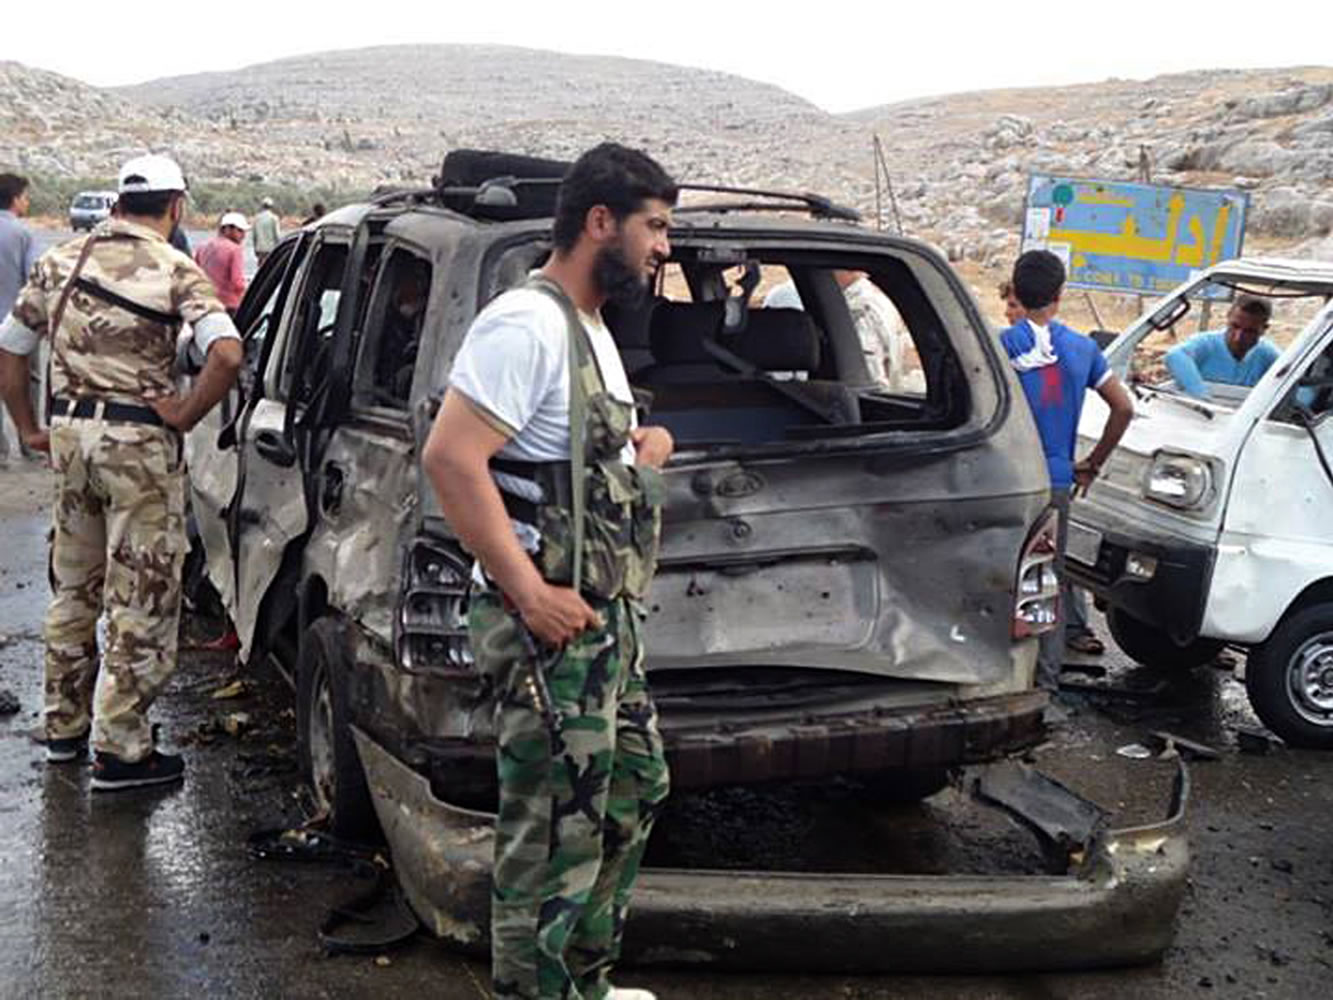 Syrian rebels with damaged cars at the scene where a car bomb exploded at a crossing point along Syria's volatile border with Turkey, in Bab al-Hawa, Syria, on Tuesday.